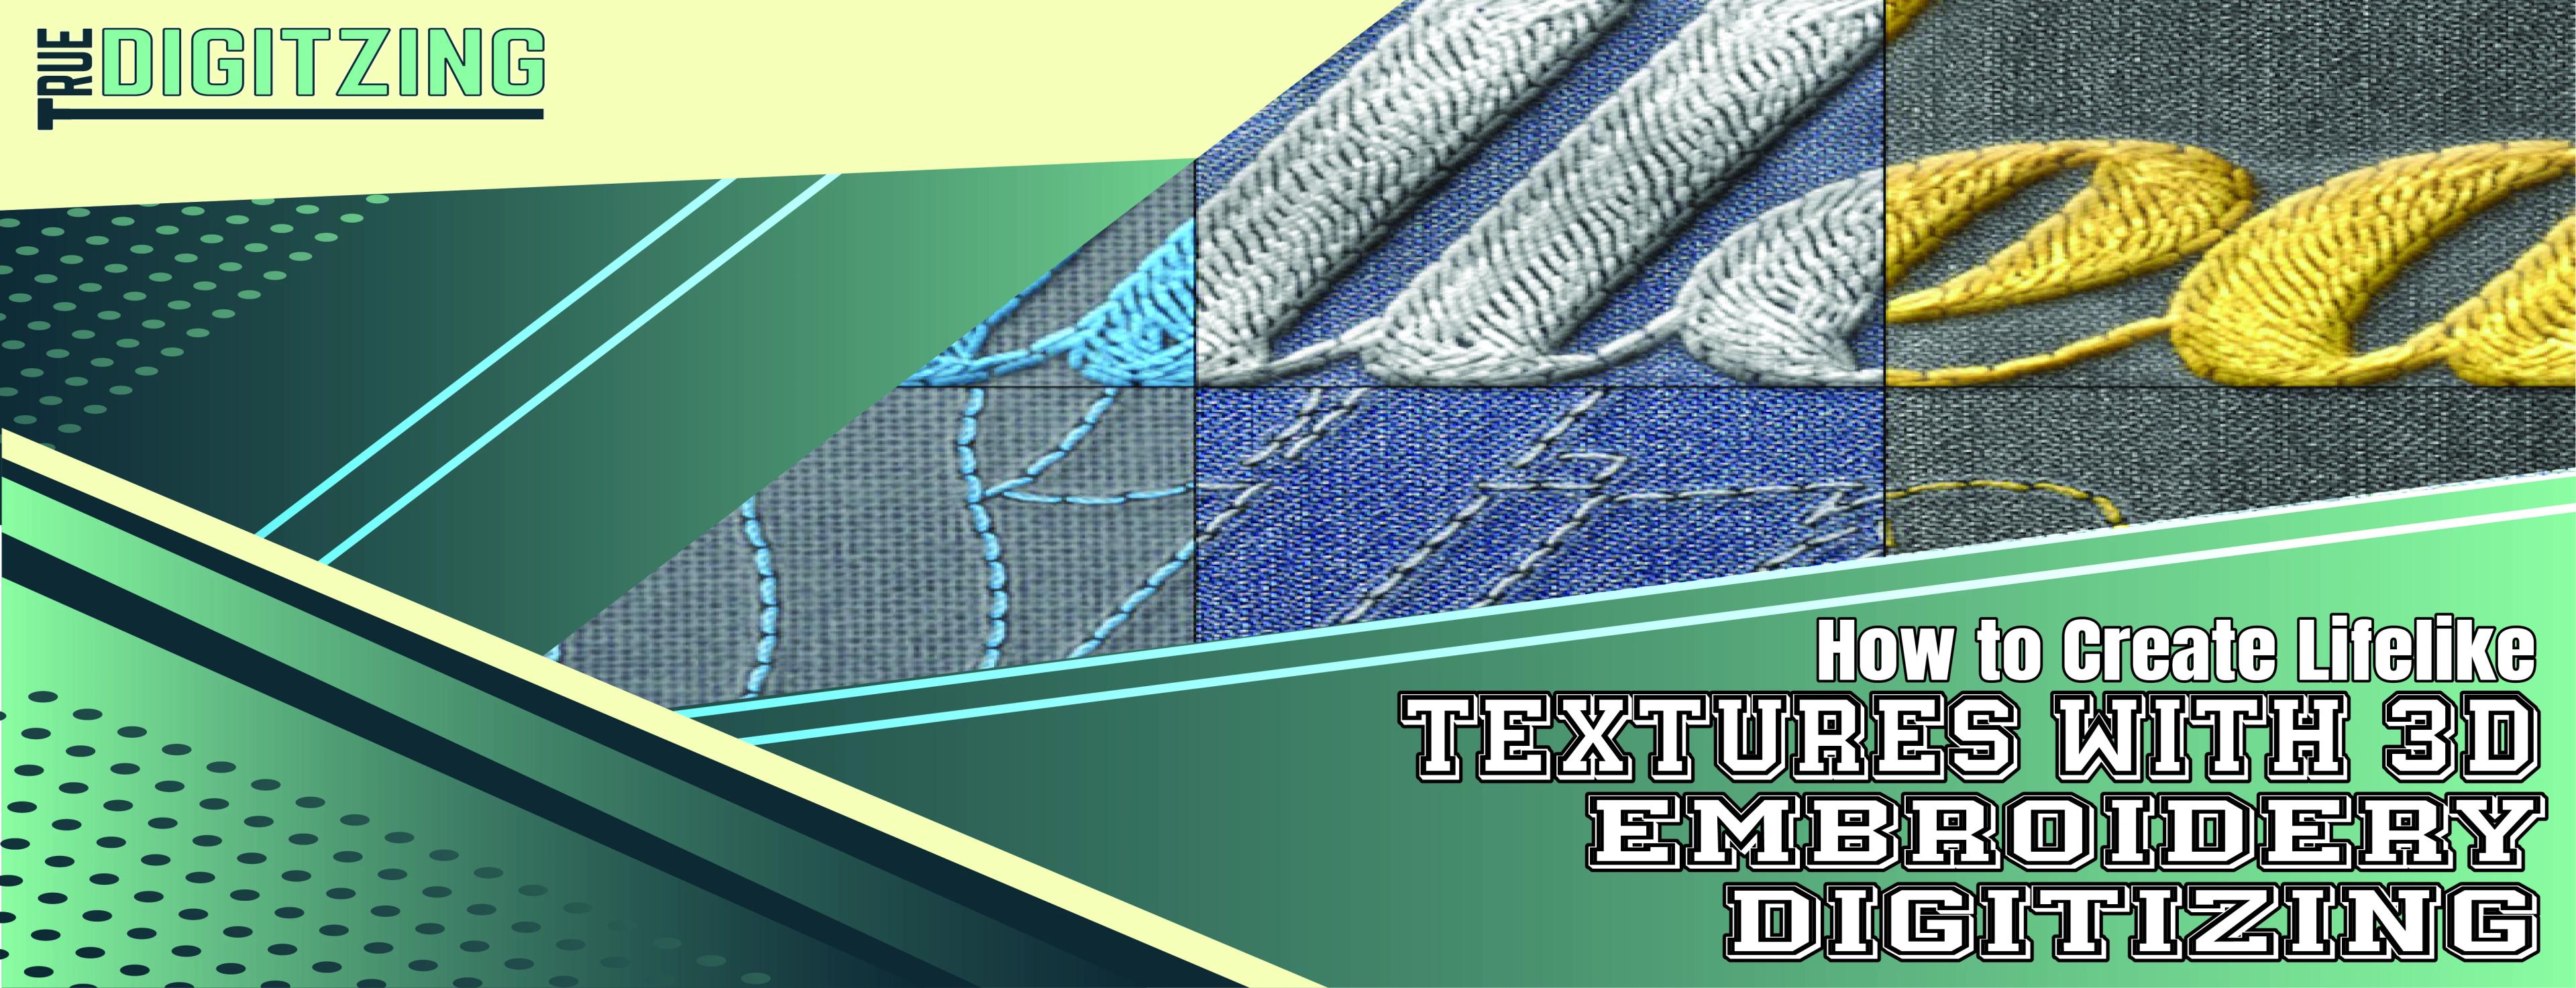 Textures with 3D Embroidery Digitizing